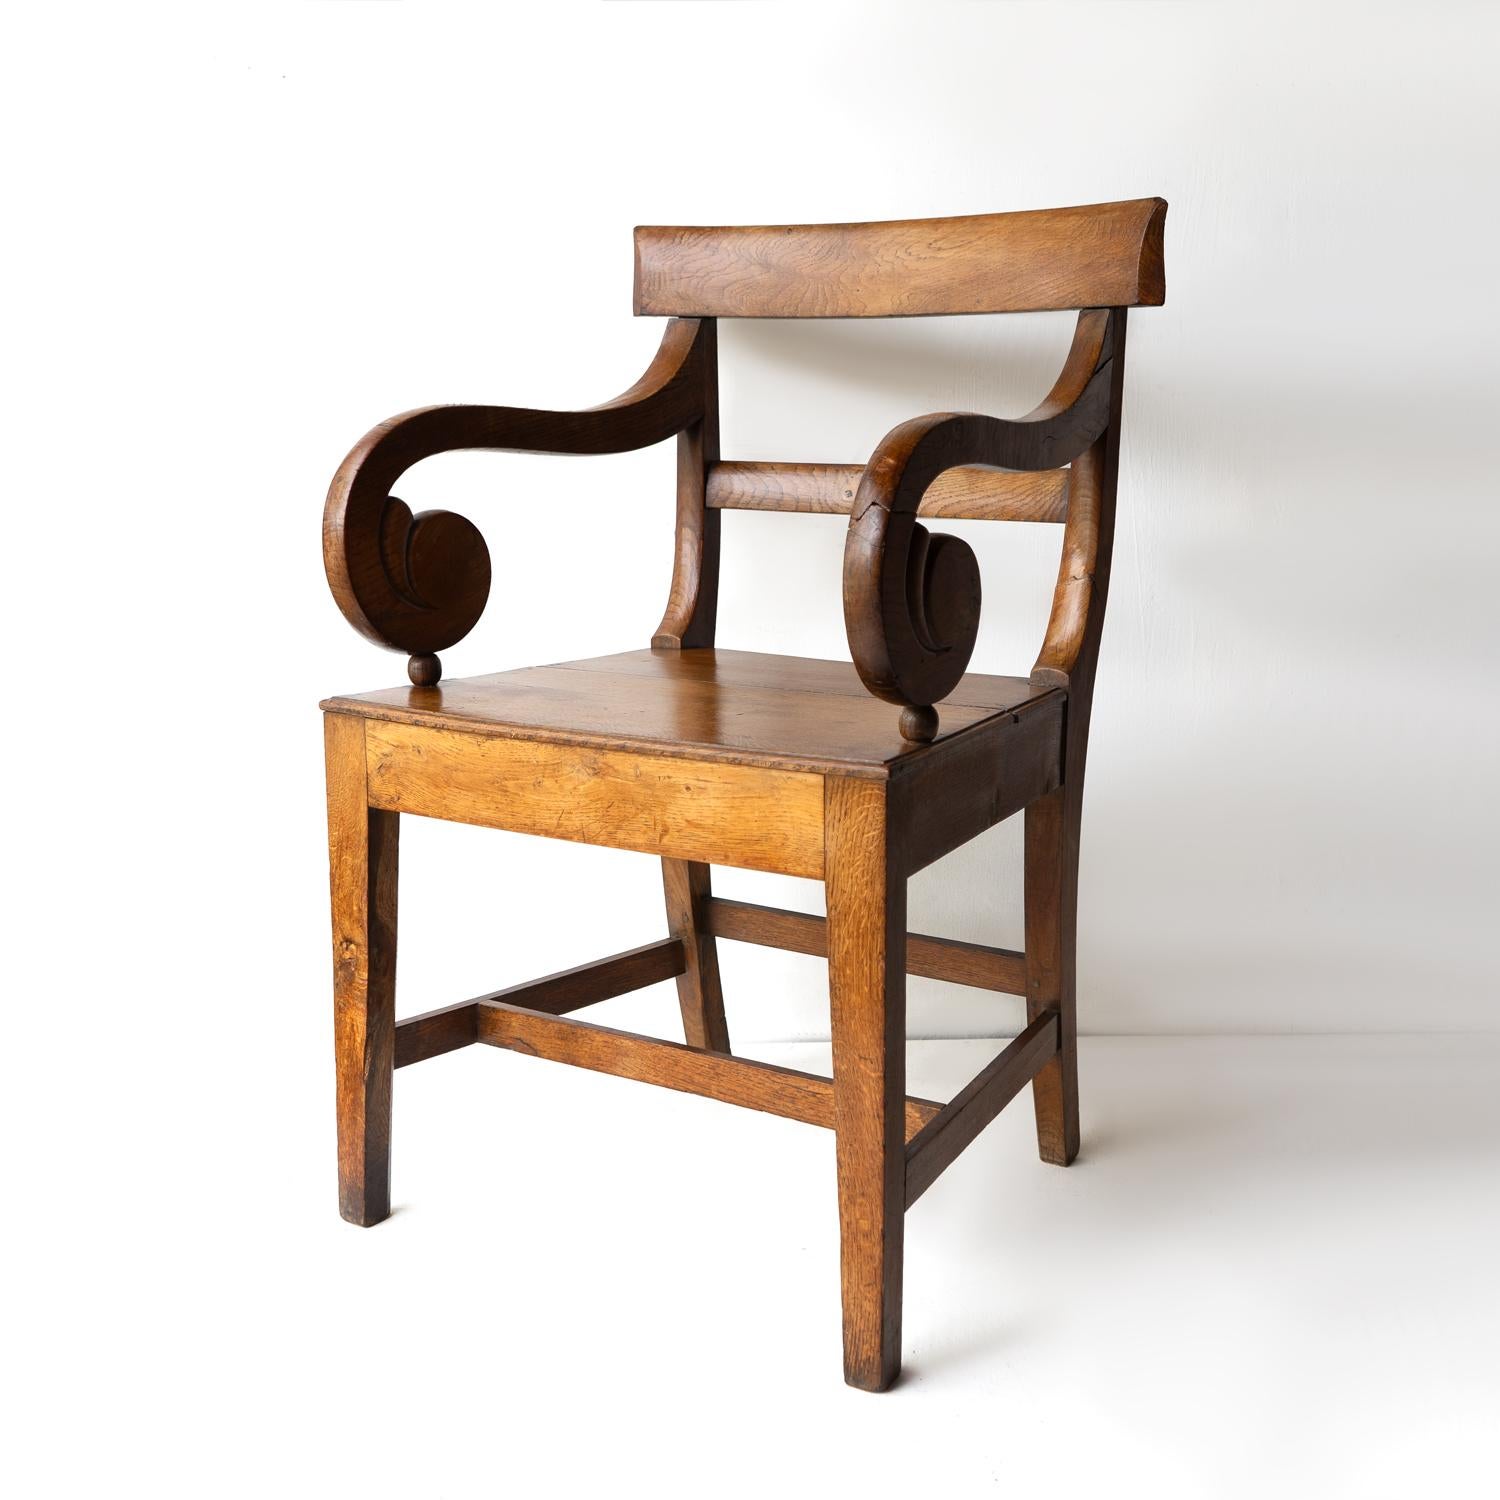 ANTIQUE ELBOW CHAIR 

A handsome and generous chair made from solid oak with peg joints, carved scrolling arms, a shaped backrest, a solid seat and legs united by an ‘H’ stretcher. 

Simple stylish lines with a mix of the elegance of Regency design